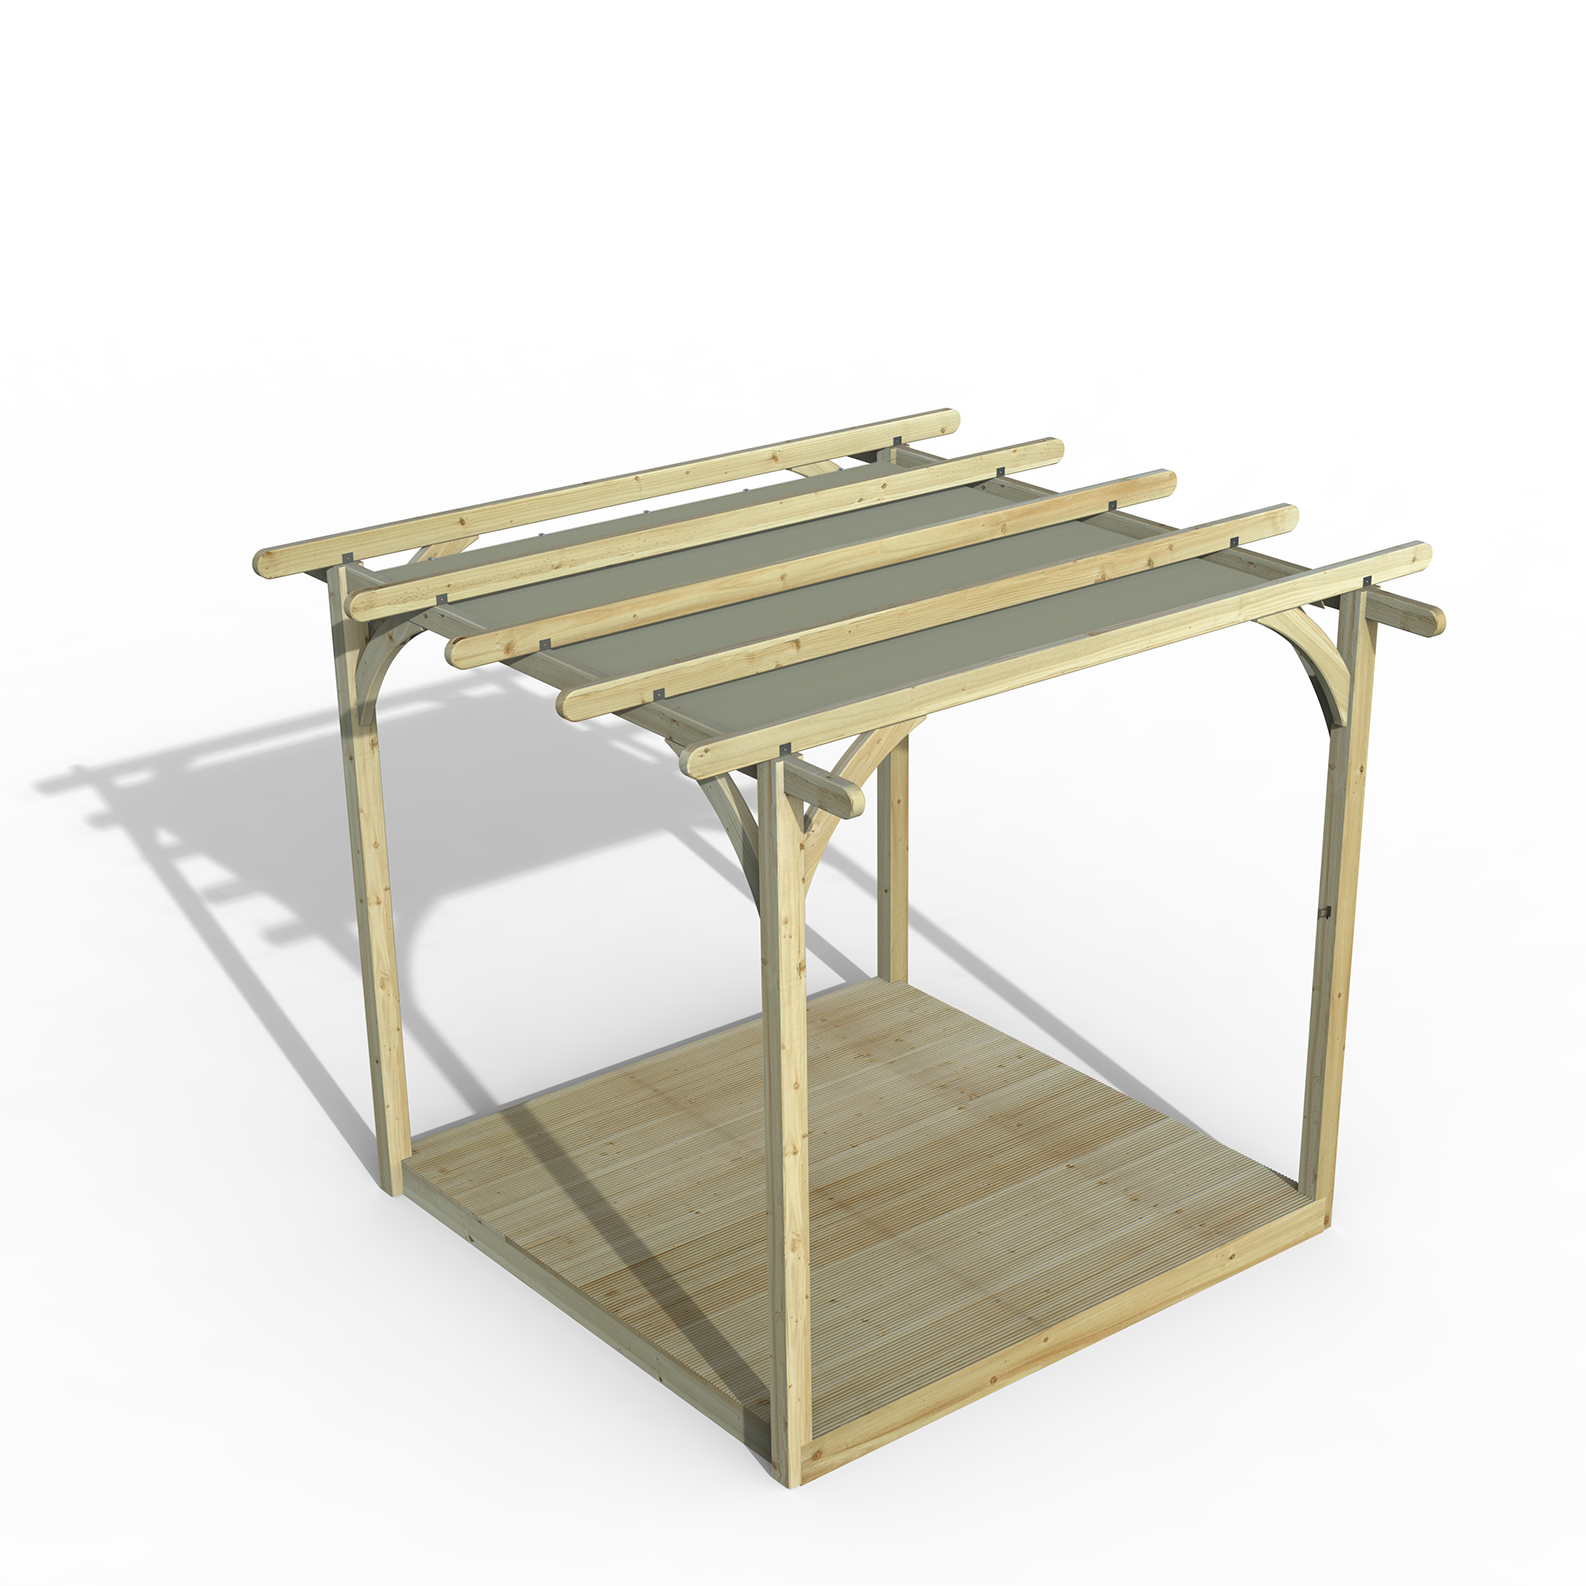 Forest Garden 2.4 x 2.4m Ultima Pergola and Decking Kit with Canopy